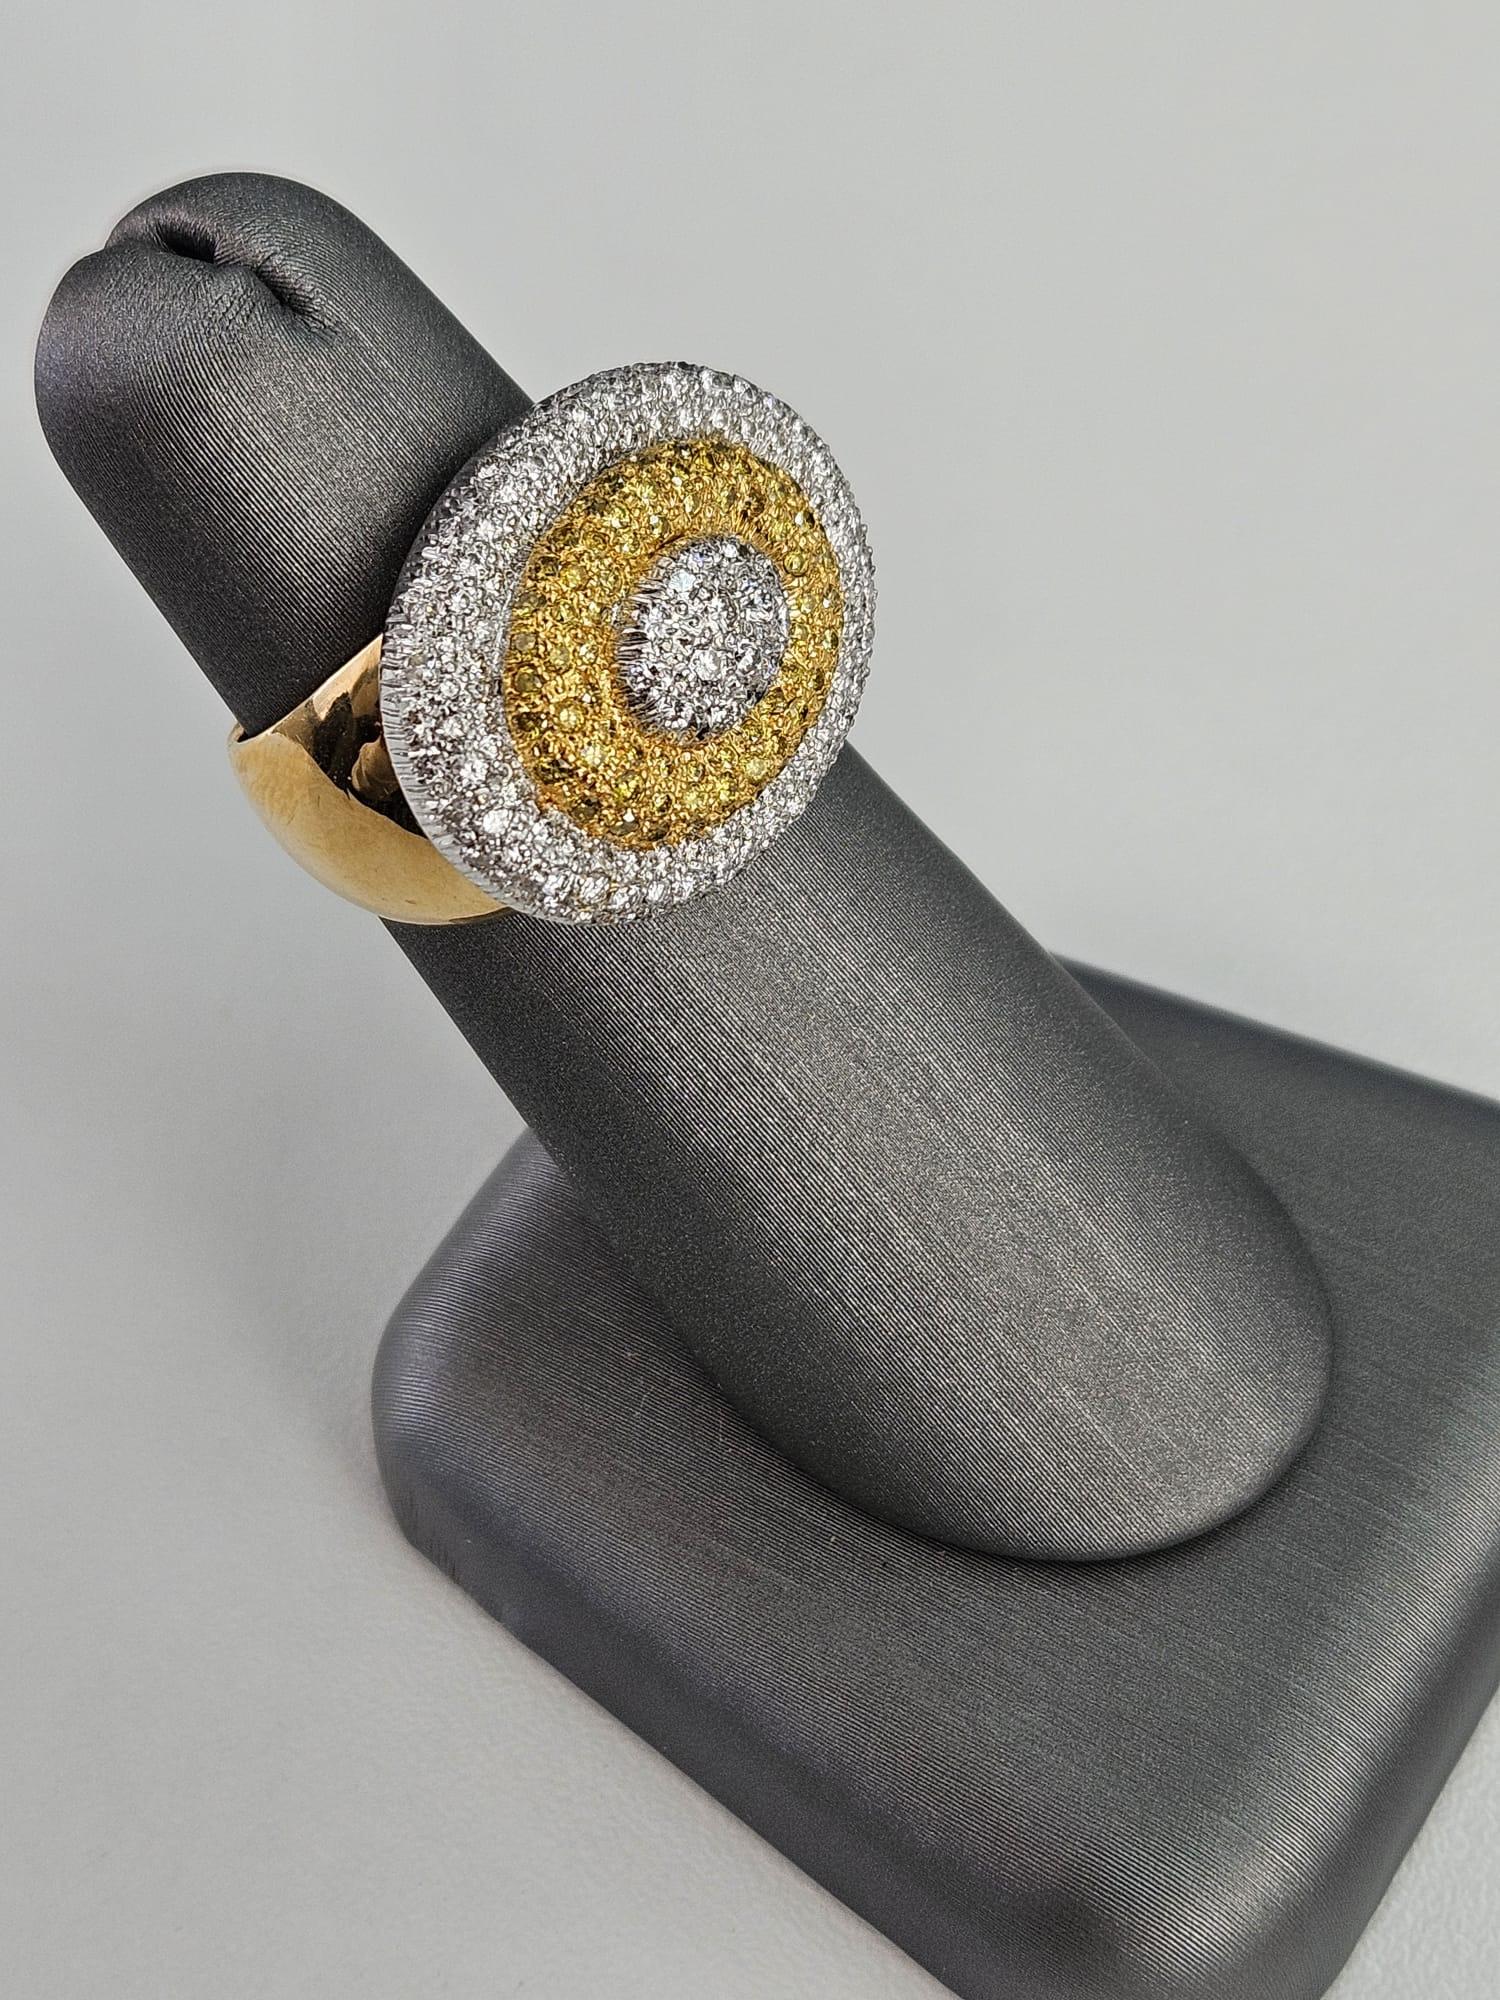 Presenting an extraordinary 1.51 carat Canary Diamond band ring, where the union of vivid yellow and sparkling white diamonds forms an exquisite pattern of nested ovals. This captivating piece showcases a 0.55-carat Canary Diamond and a 0.96-carat